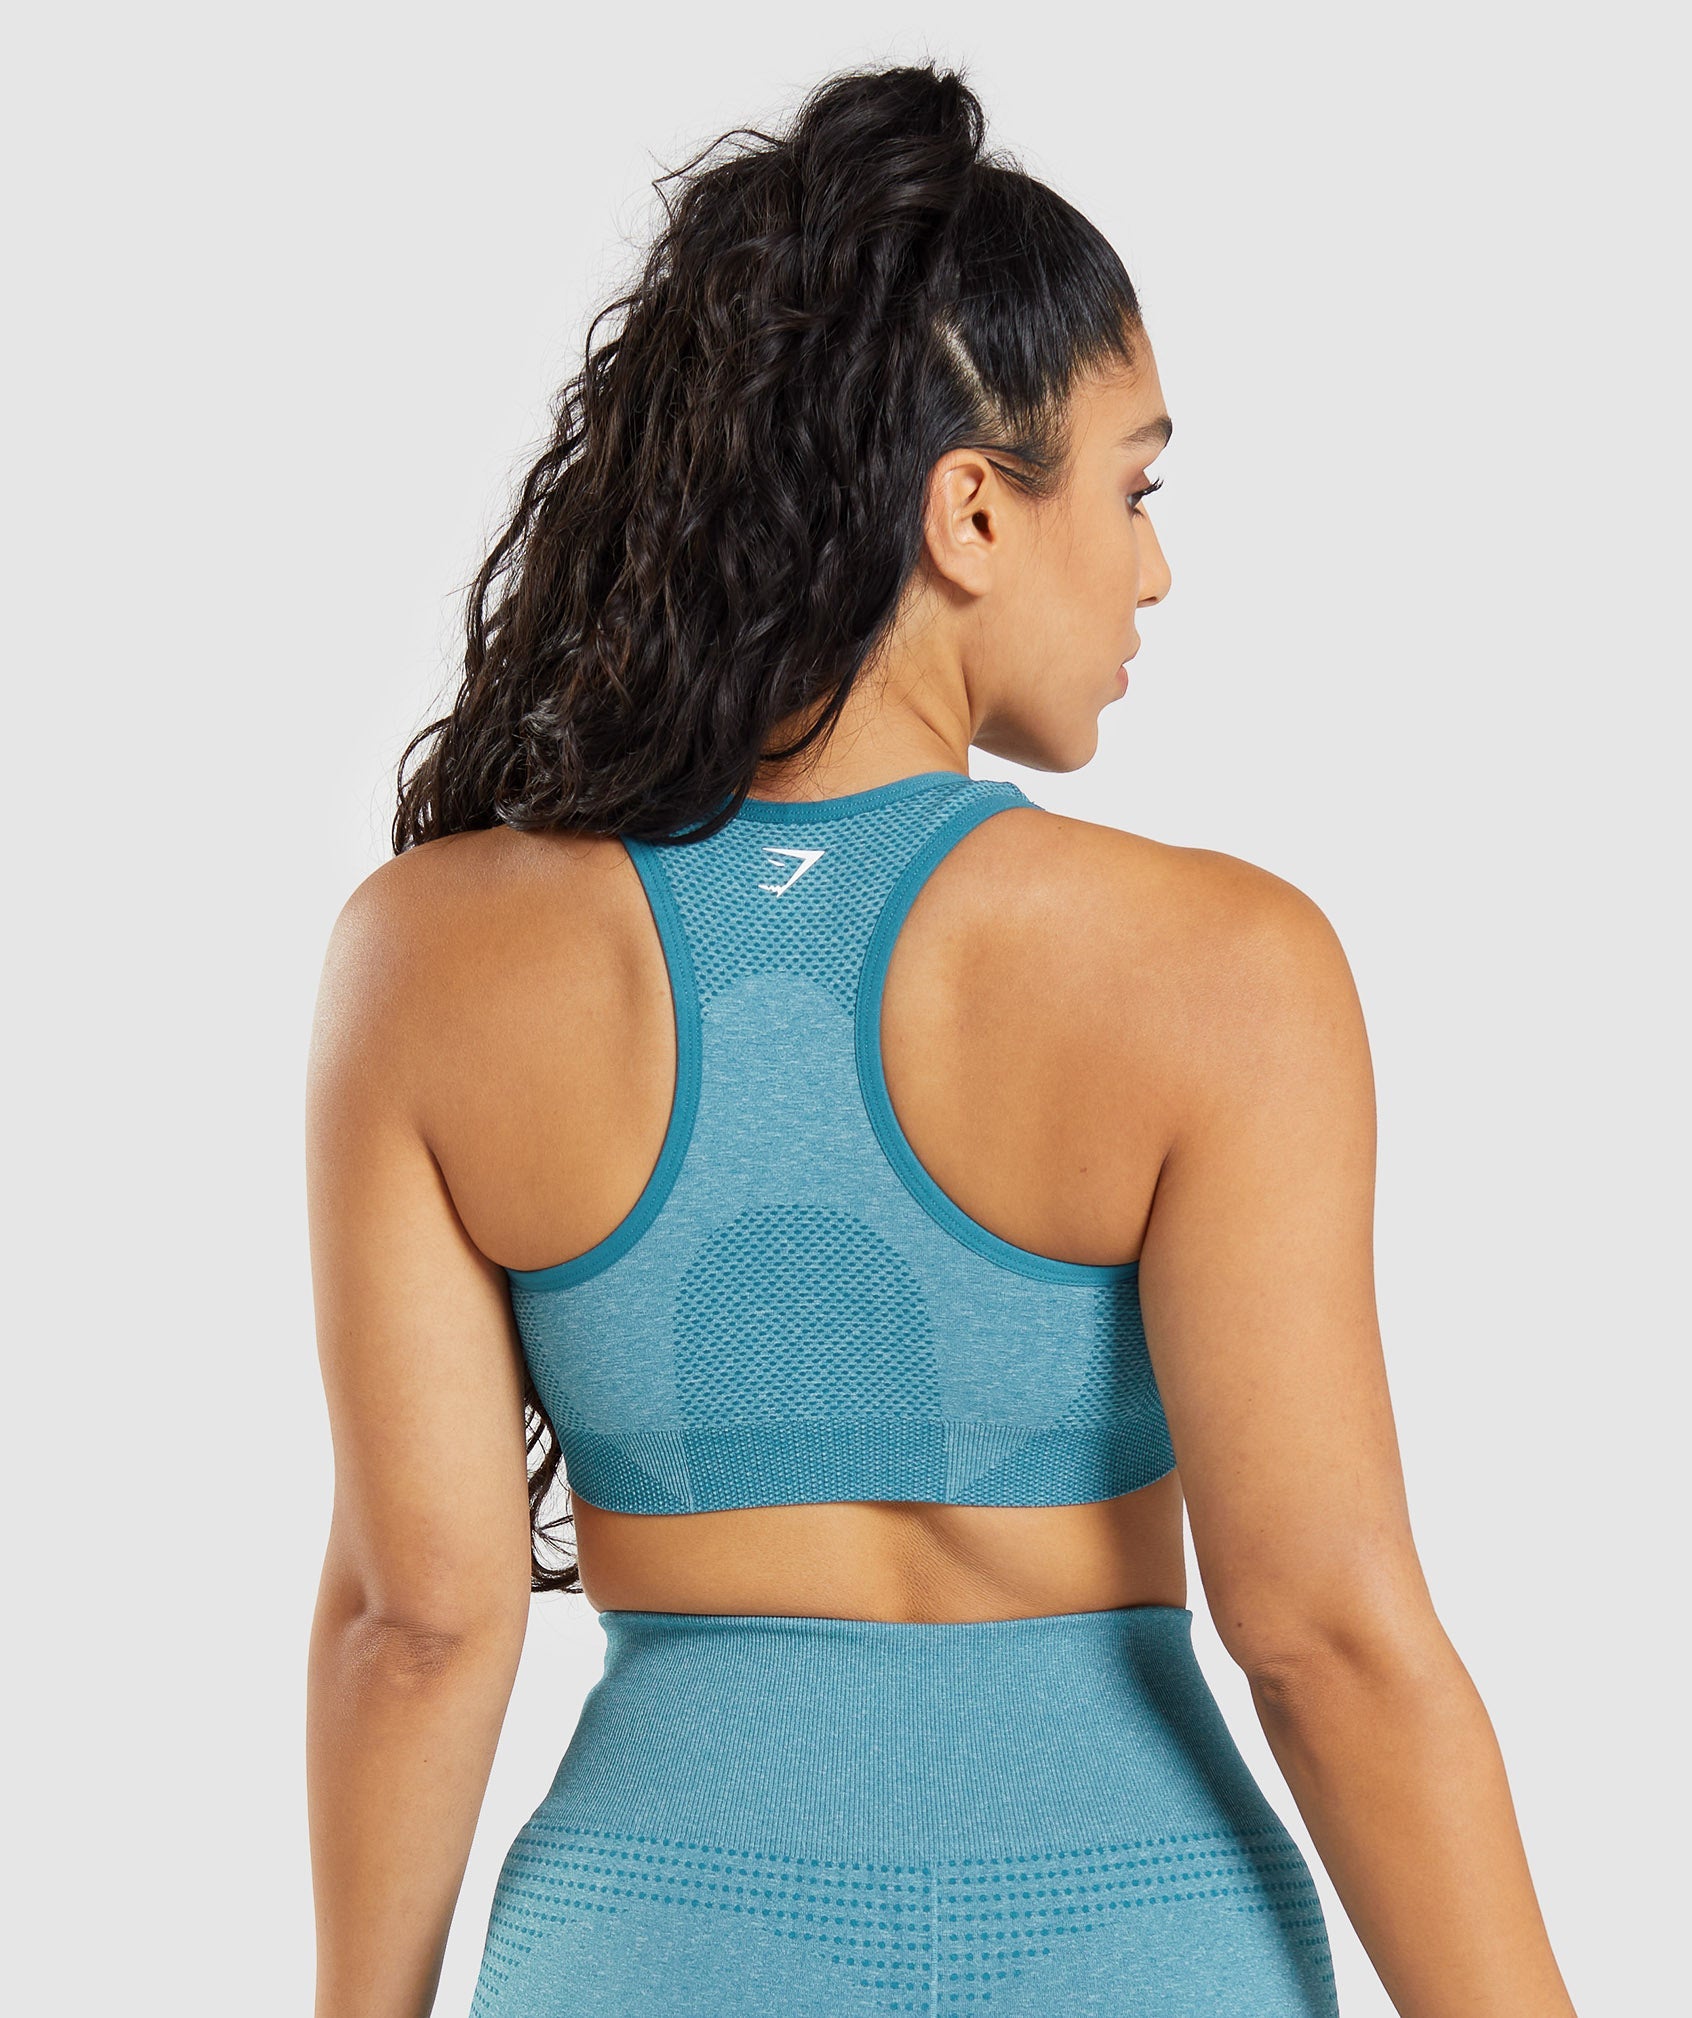 Gymshark Legacy Sports Bra Blue Size XS - $35 New With Tags